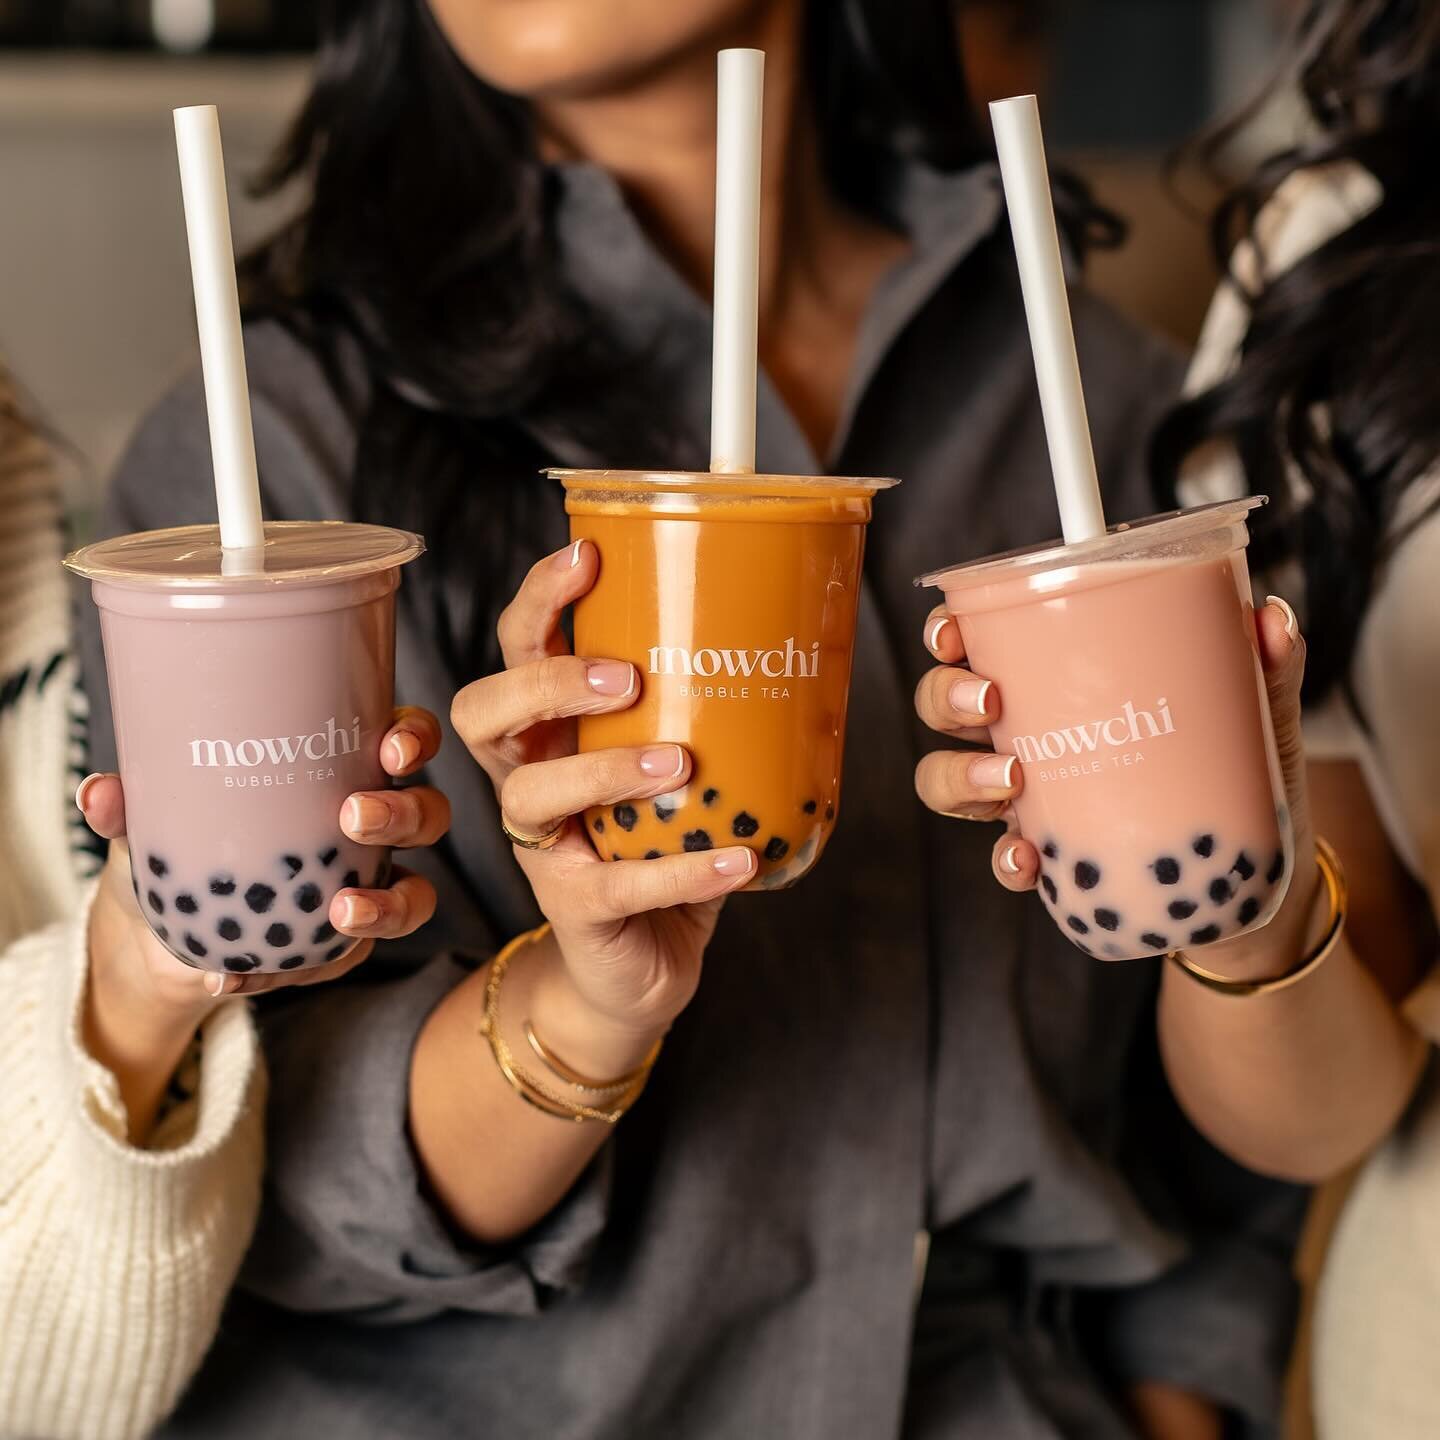 galentines before valentines 🩷

celebrate feb 13th with your bffs + bubble it up with our exclusive Valentine&rsquo;s Day drinks here at mowchi 🫧🎀🧋

it&rsquo;s love at first sip 💘

#galentines #galentinesday #bff #bubbletealover